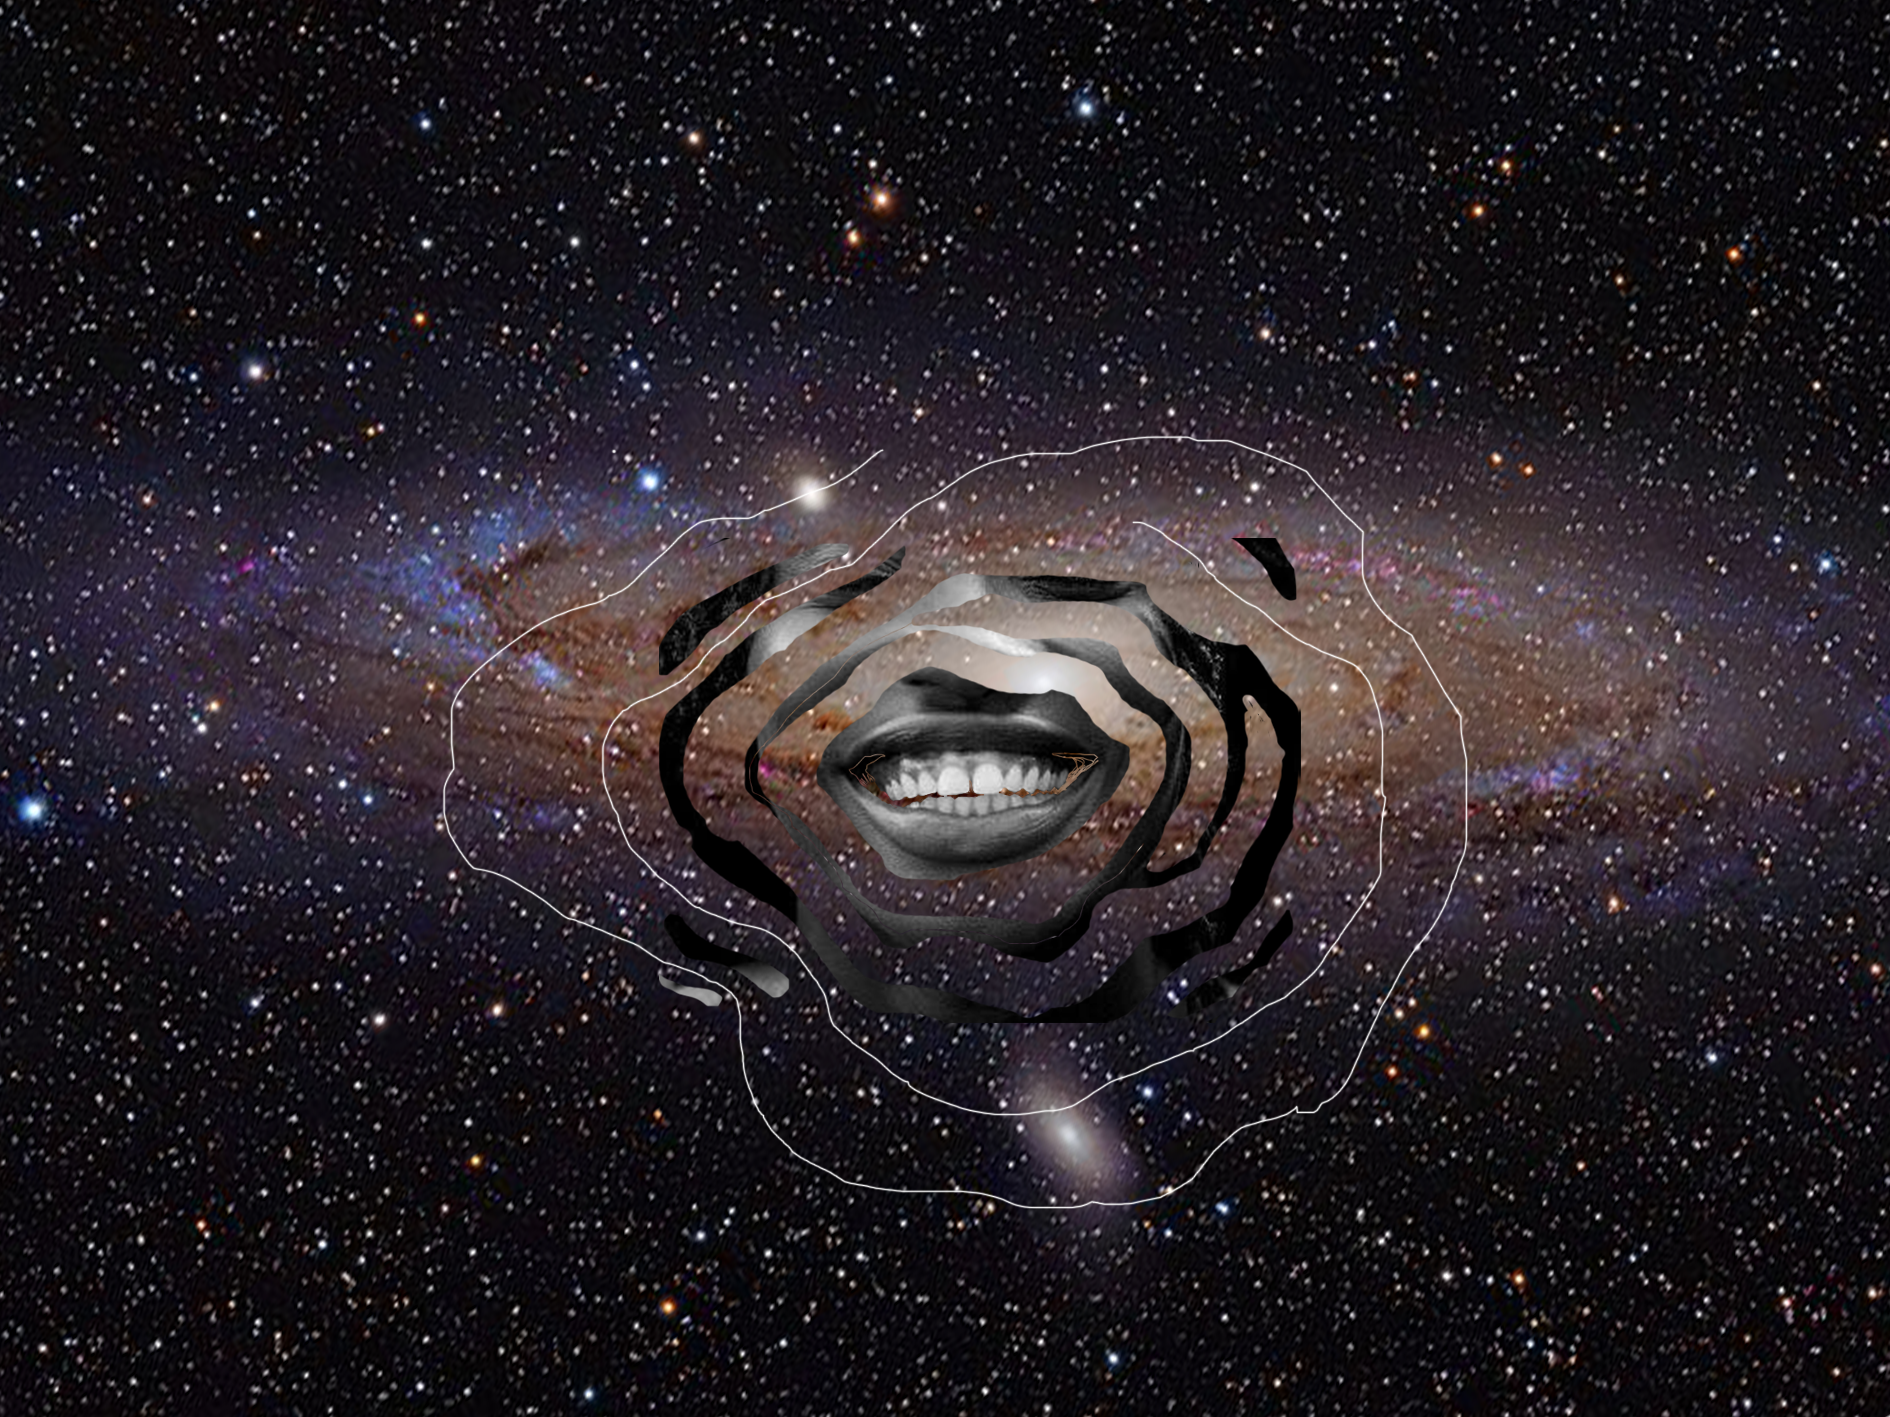 Digital illustration of a galaxy with an overlaid image of a grinning mouth in the centre, by Aïsha Trambas.